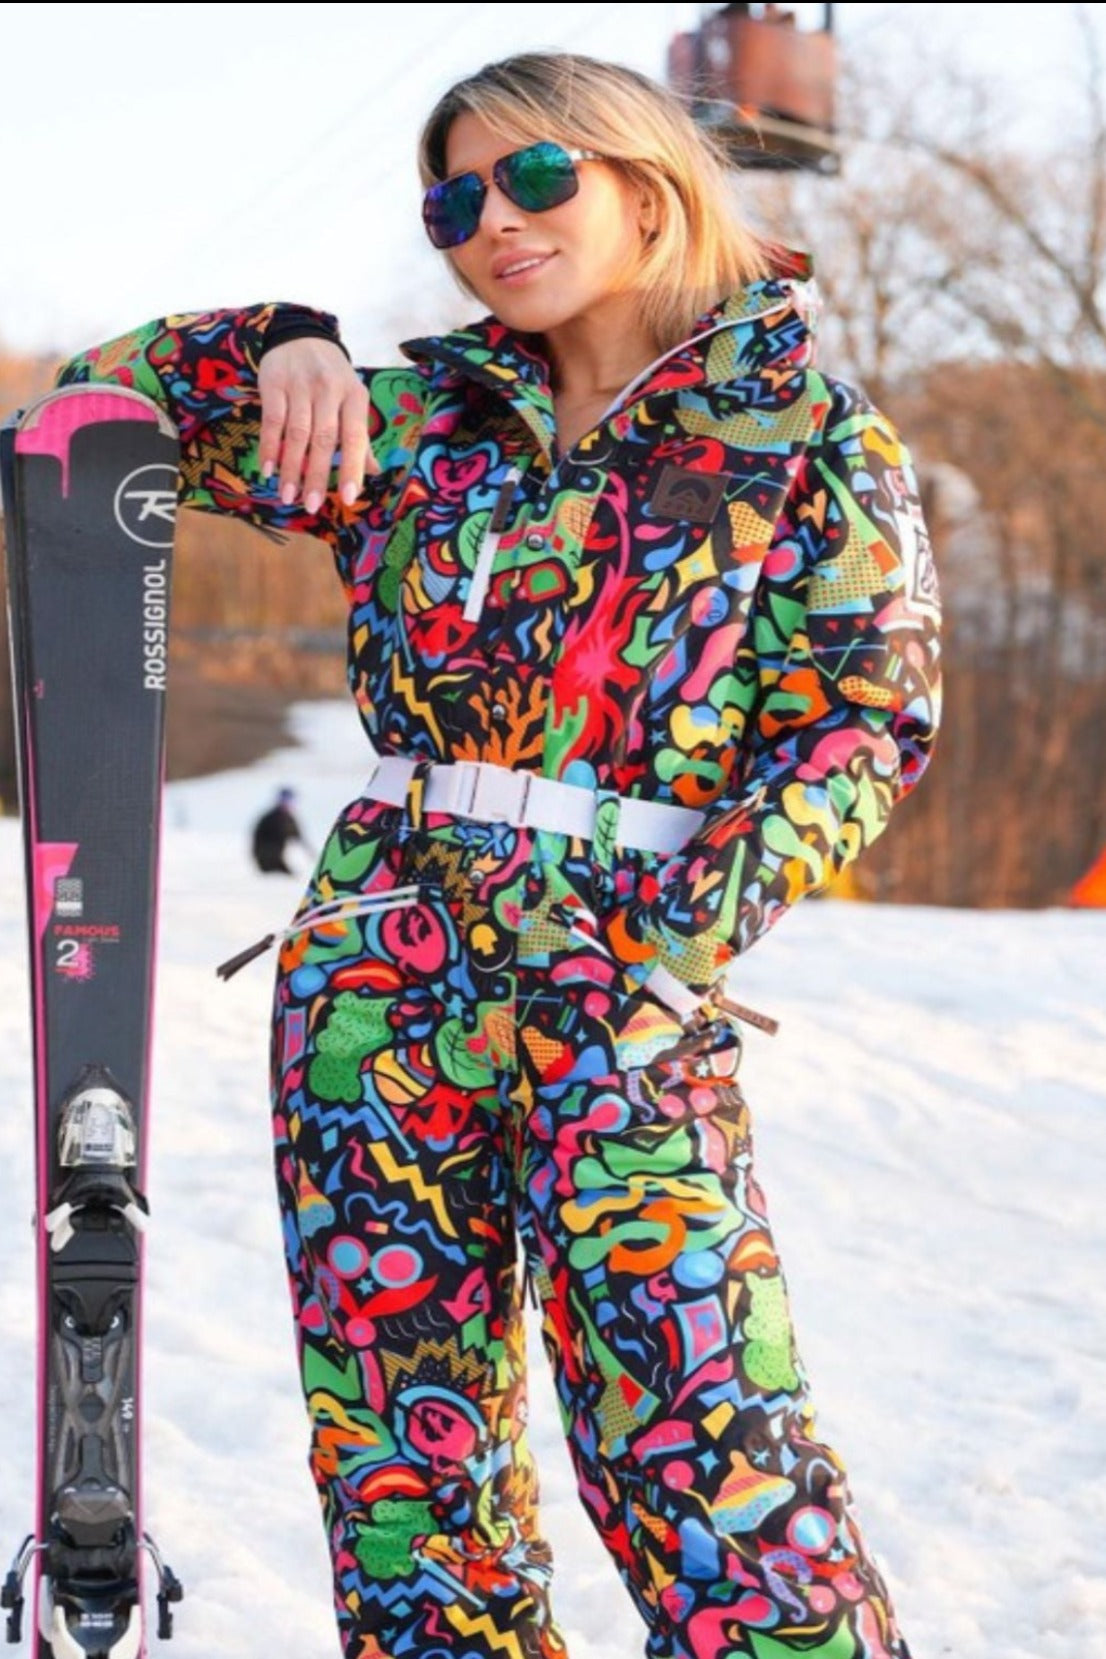 Stairway to Heaven Curved Female Ski Suit